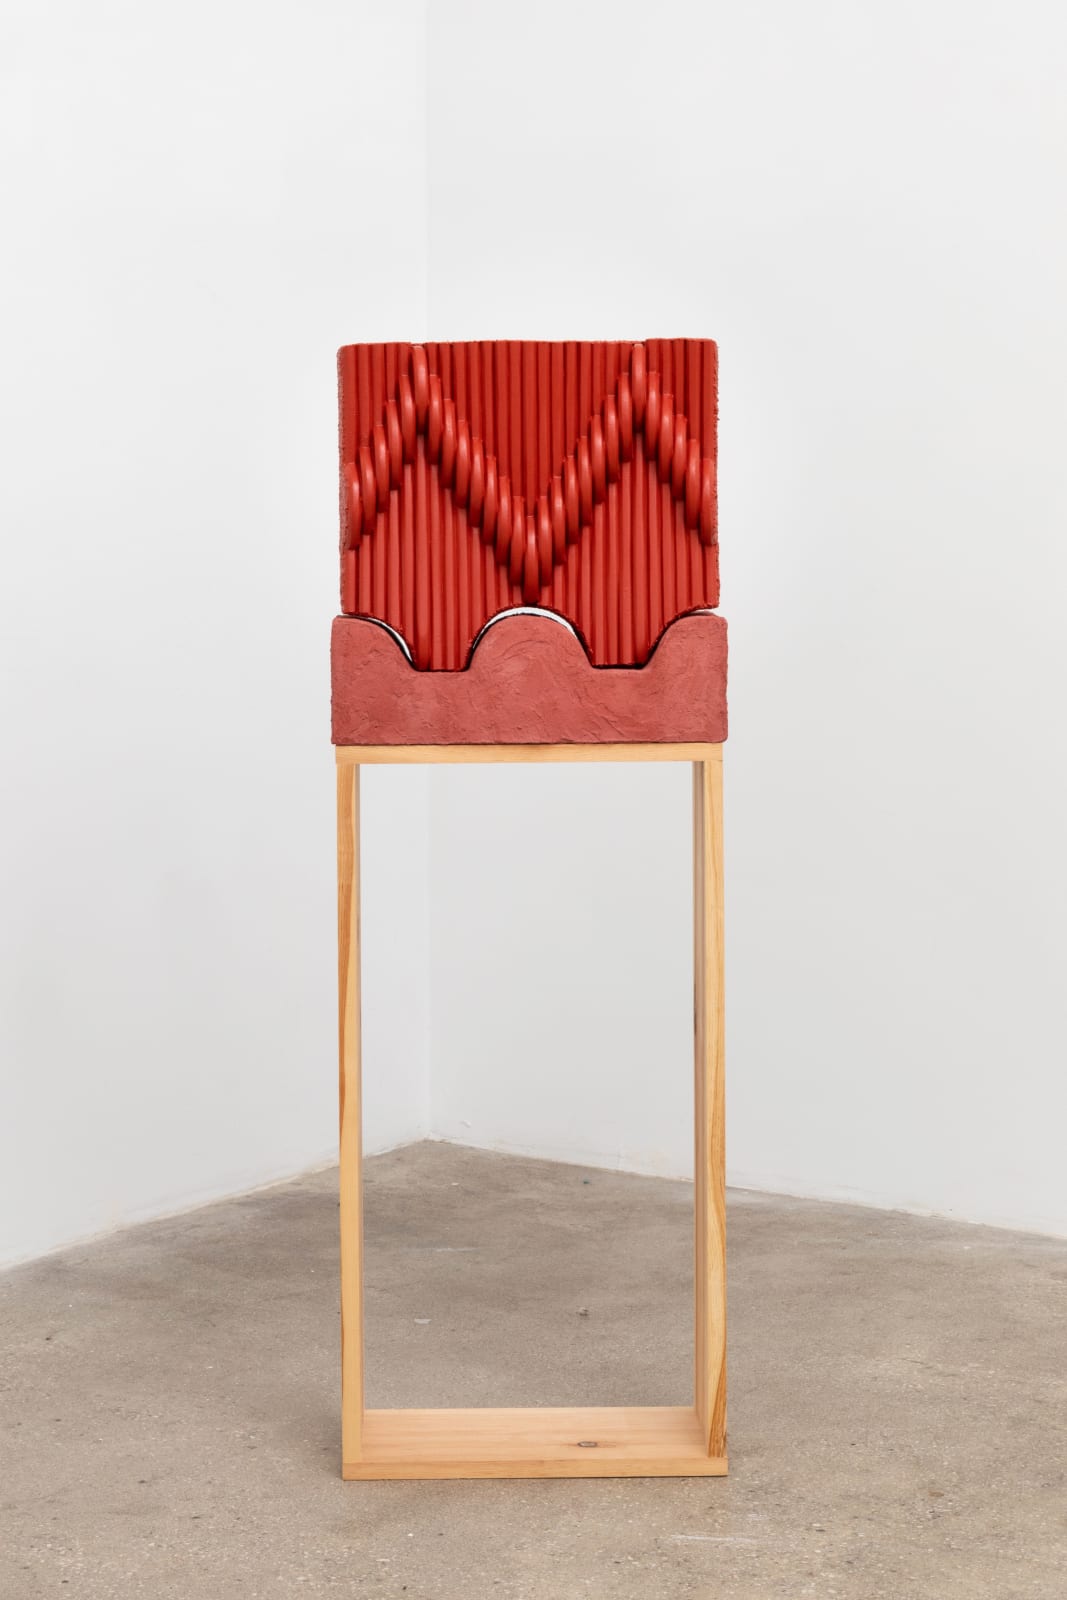 Free-standing sculpture consisting of carved polystyrene pieces aggregated together to form a red hued, interlocking patterned square form that sits on top of a rectangular wooden pedestal. 